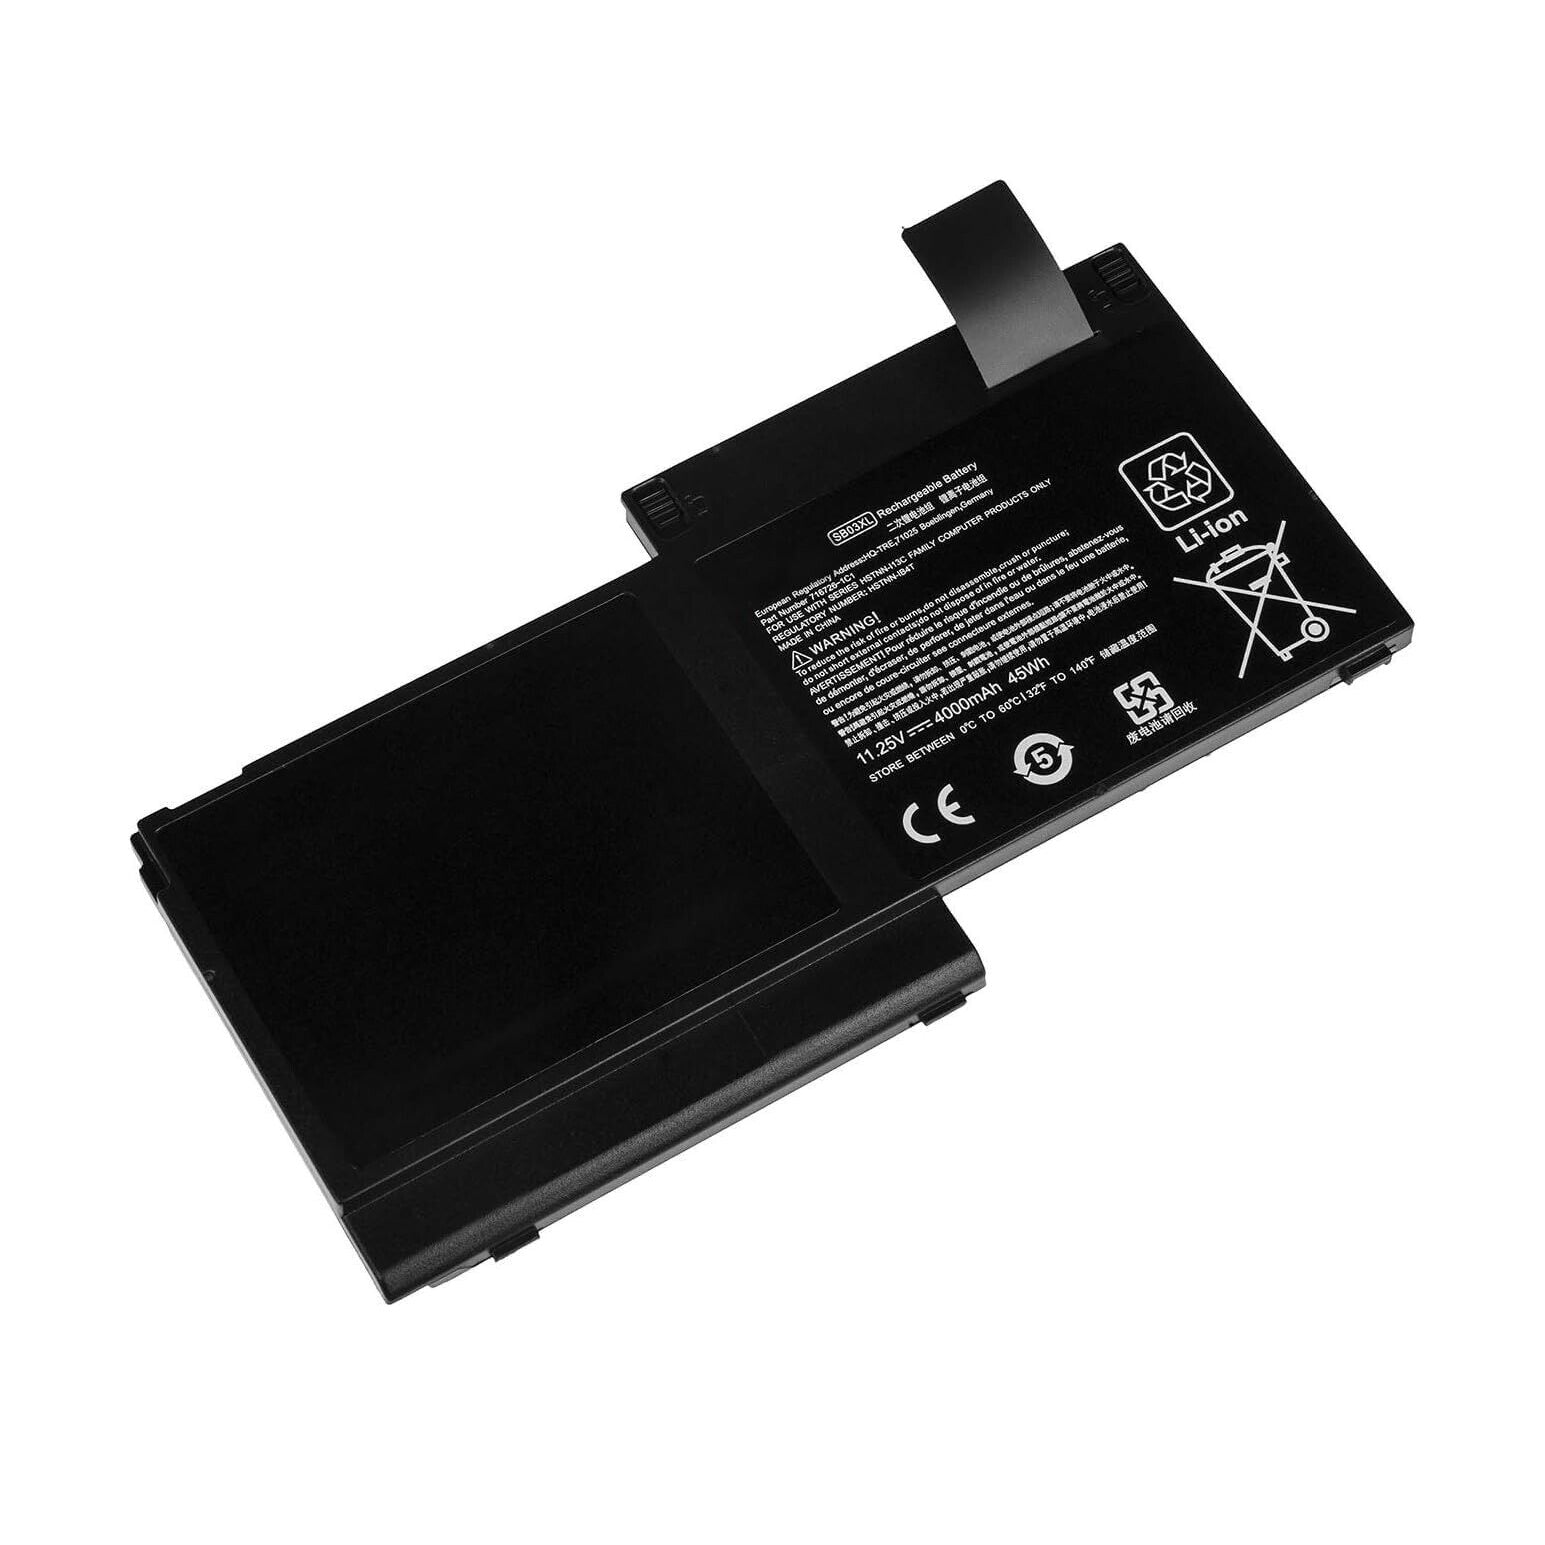 Replacement Battery For HP EliteBook 820 720 725 G1 G2 - SB03XL